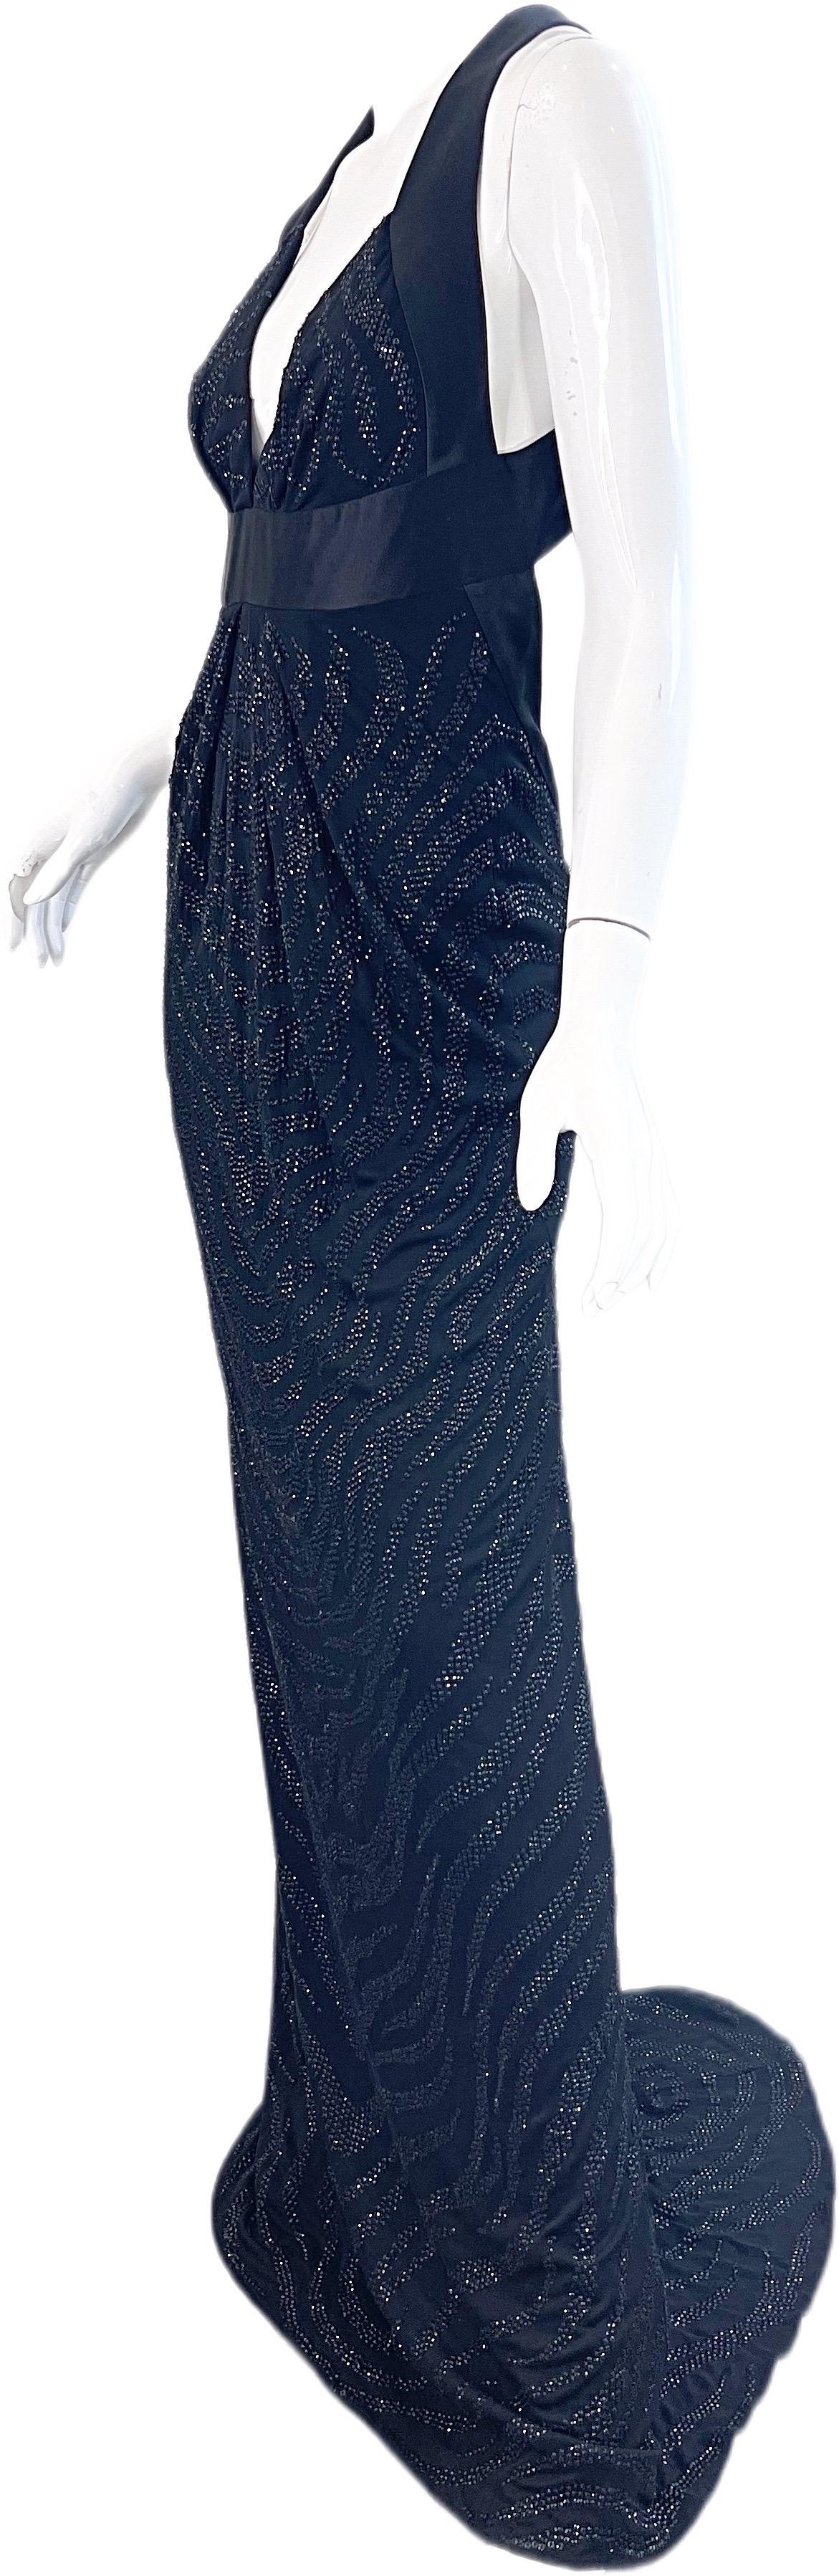 NWT $7.5k Roberto Cavalli Fall 2006 Black Sequin Zebra Print Plunging Back Gown For Sale 10